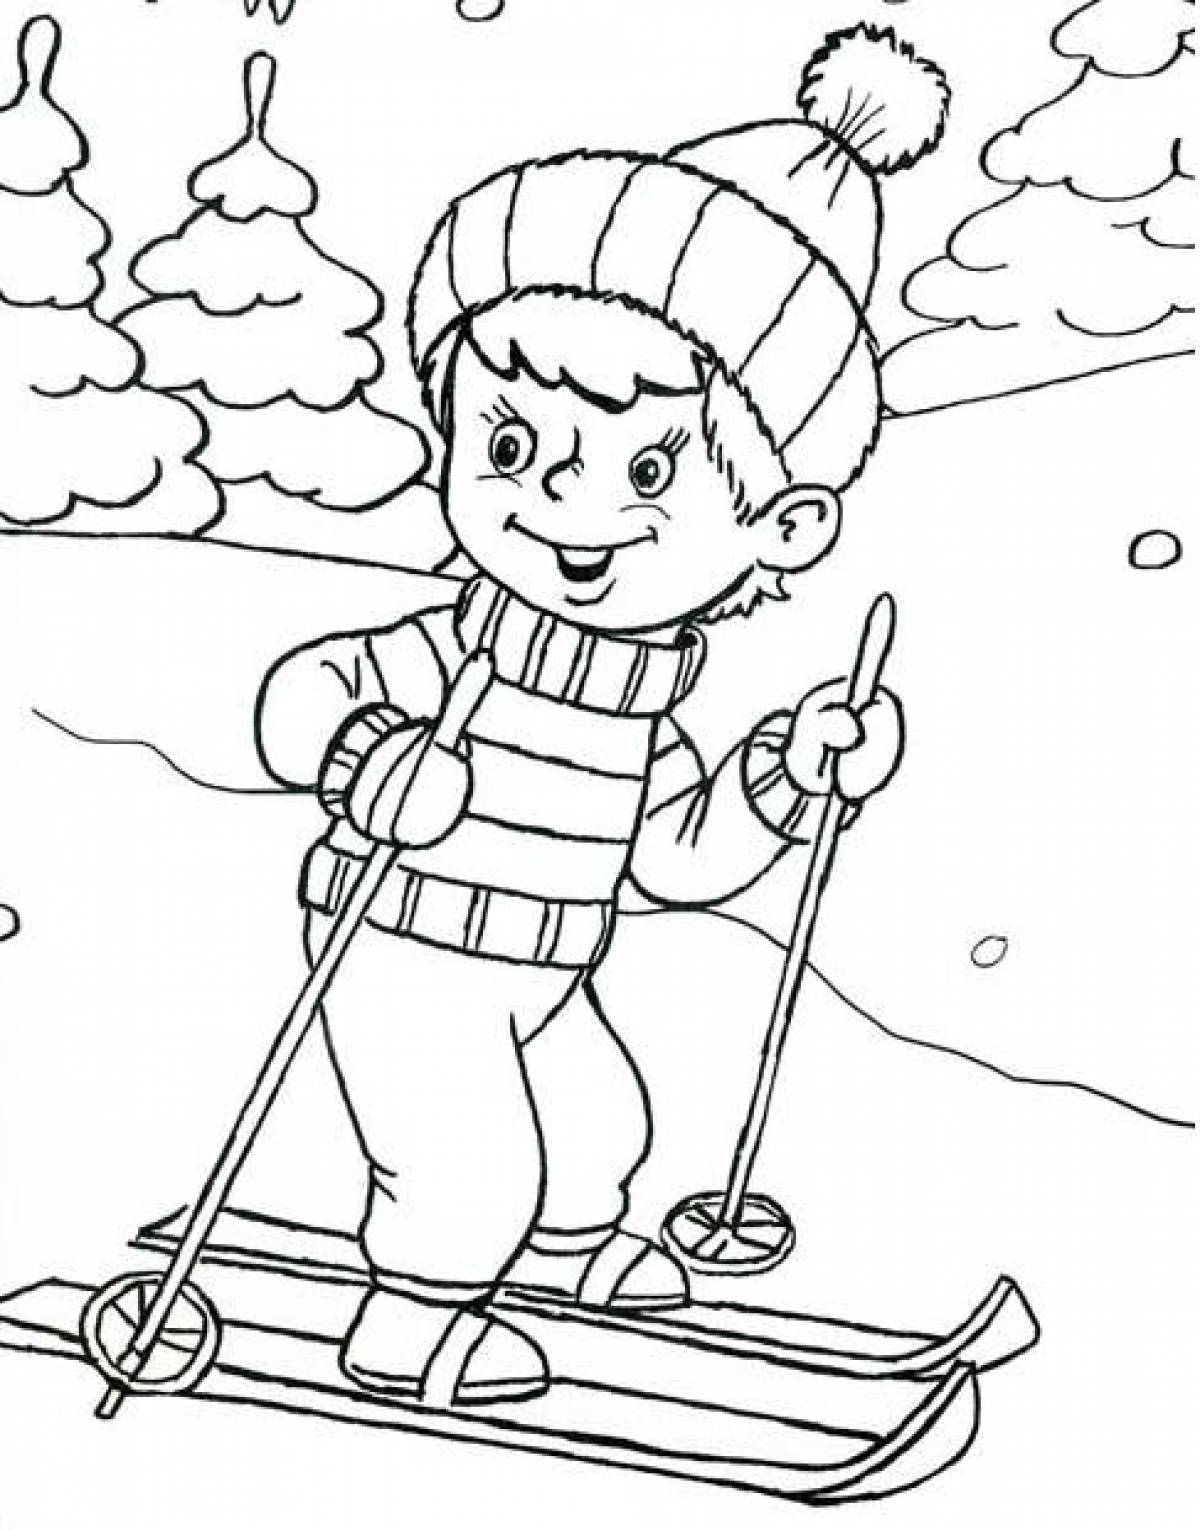 Glitter skier coloring page